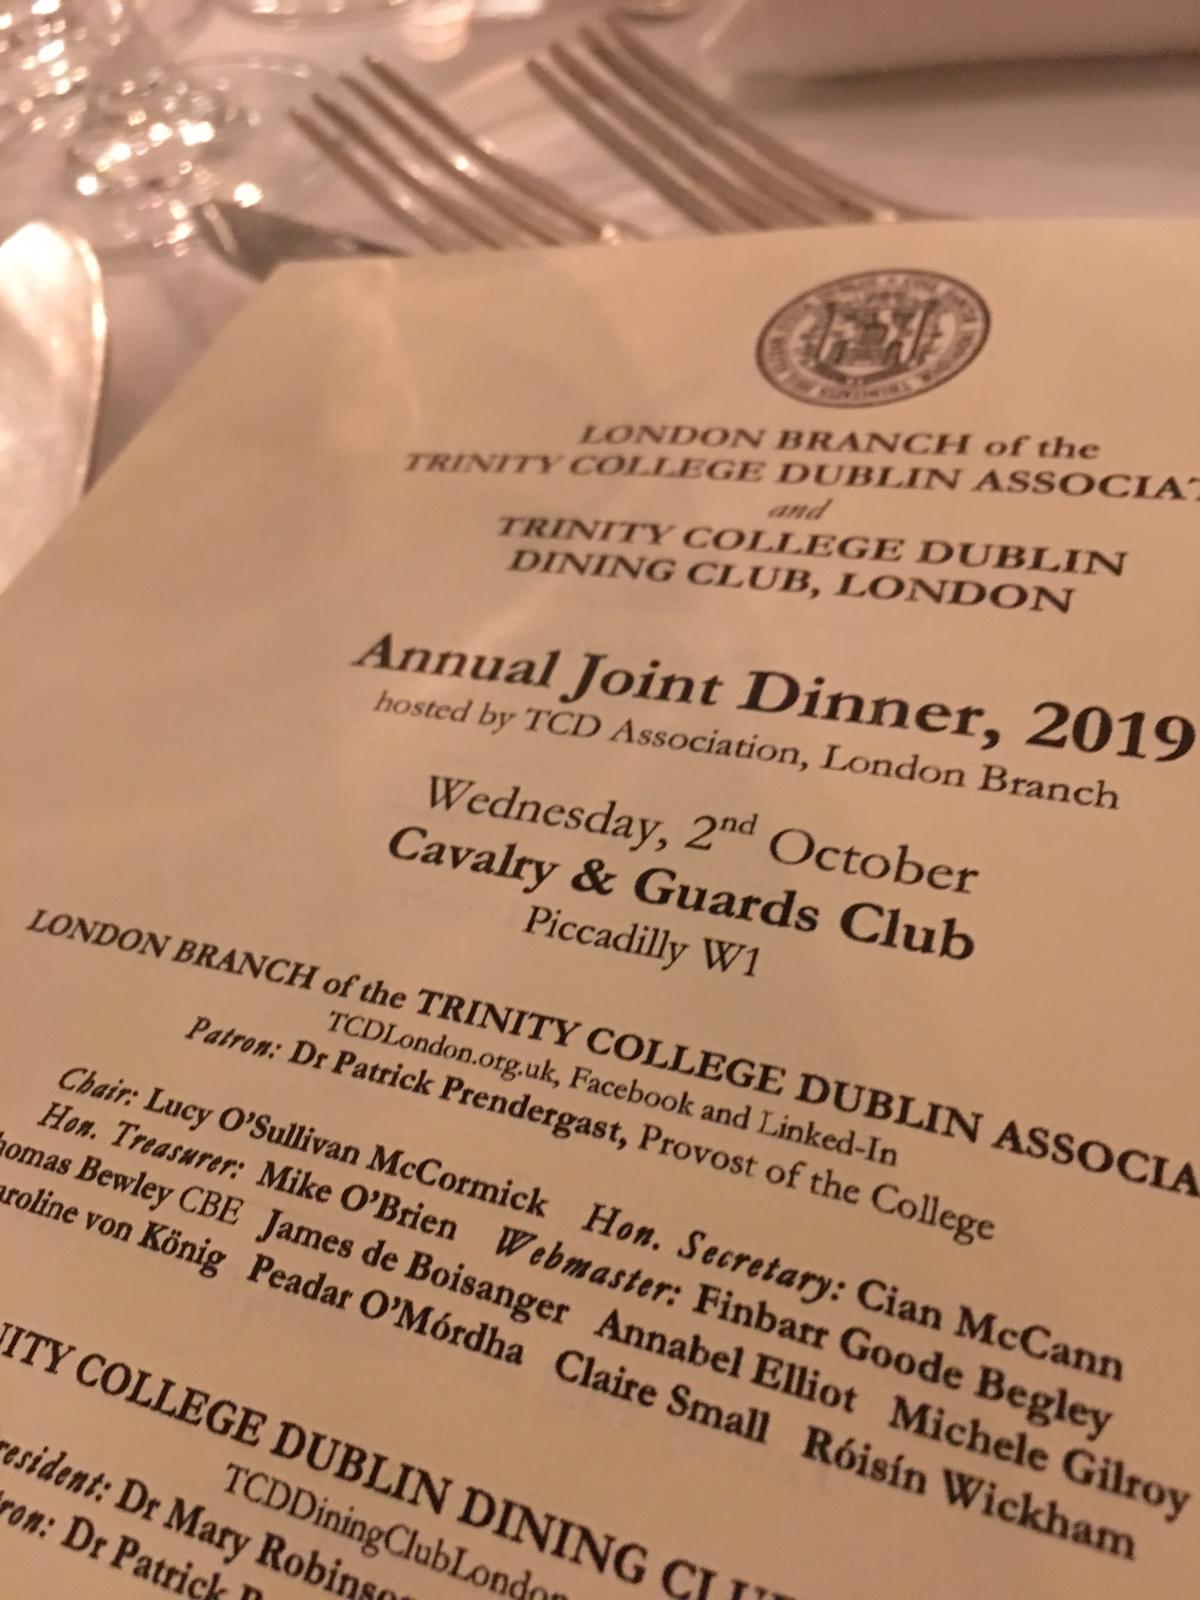 paul mcguiness former manager u2 trinity college dublin tcd association london joint dinner 2019